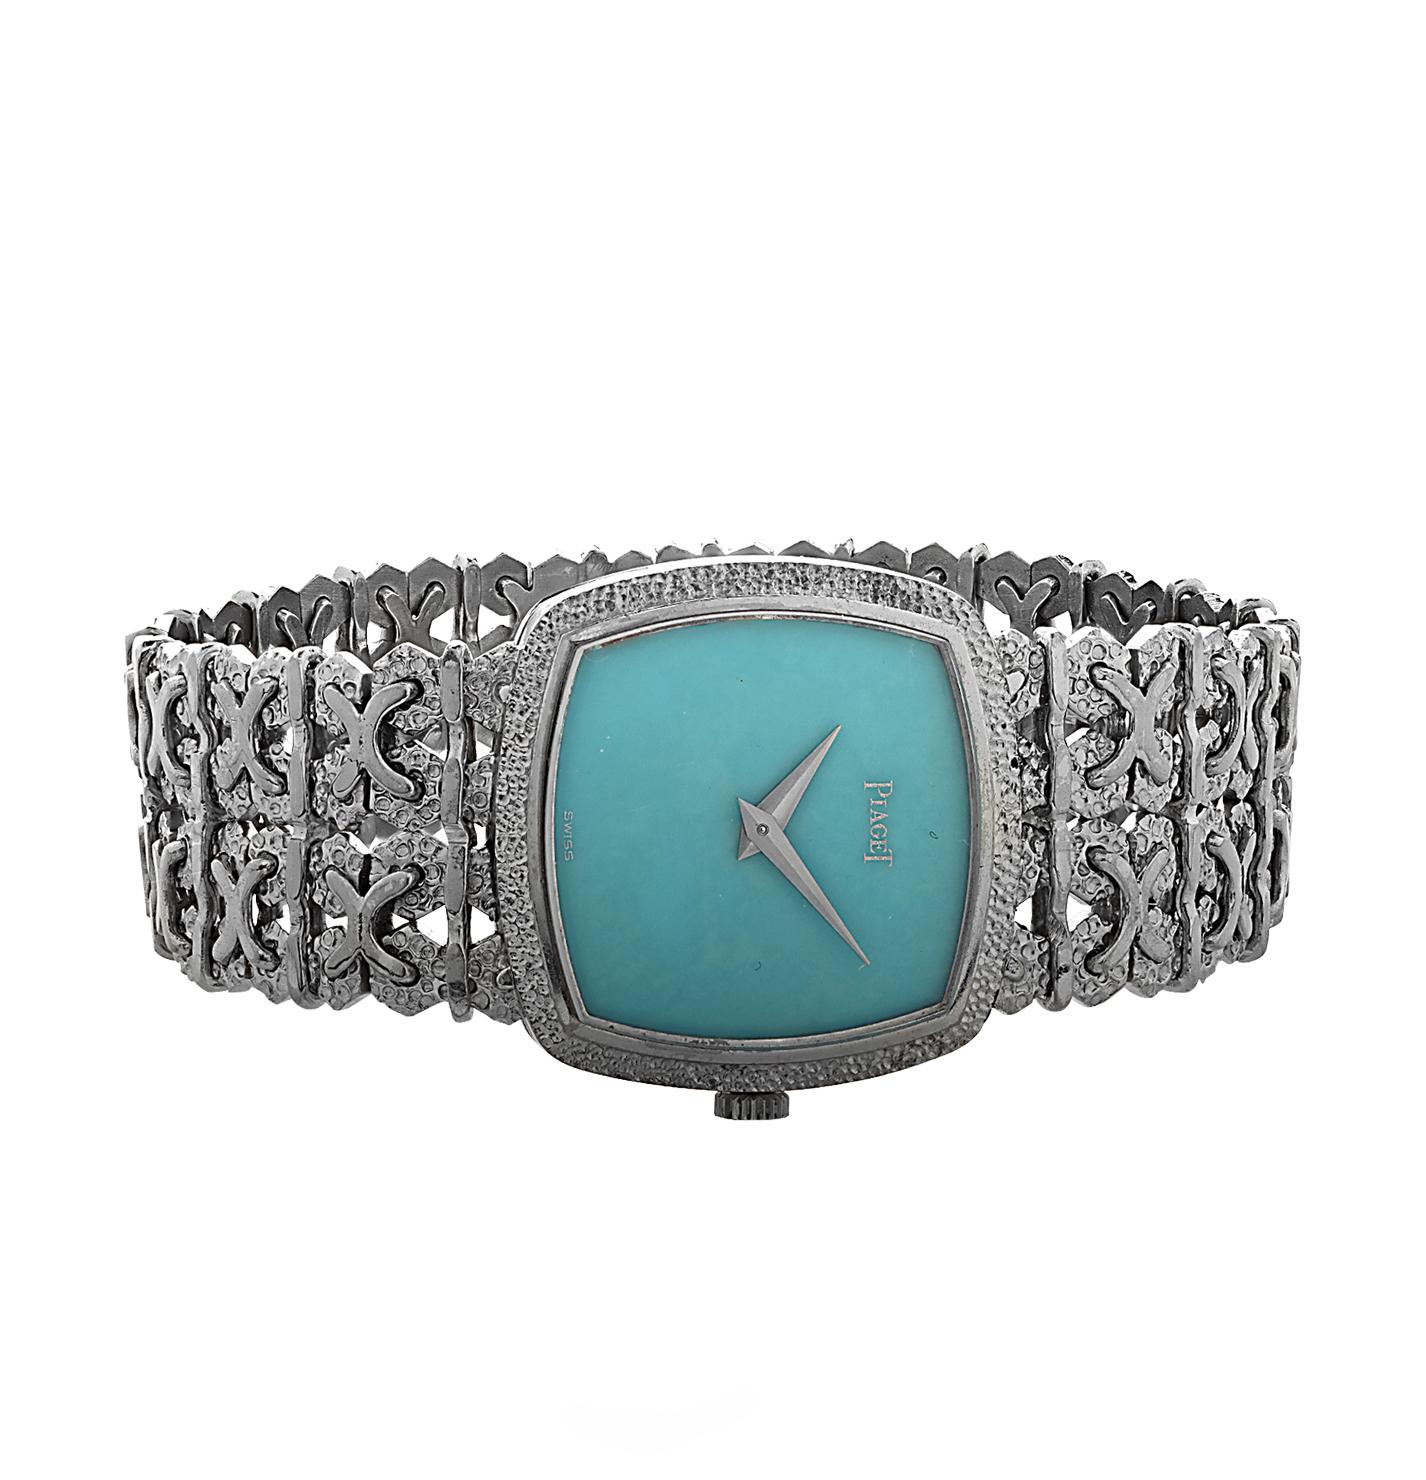 Ladies manual wind Piaget watch crafted in 18 karat white gold with a Turquoise dial. The case measures 23 mm and the ornate bracelet measures 6 inches in length. 

Our pieces are all accompanied by an appraisal performed by one of our in-house GIA